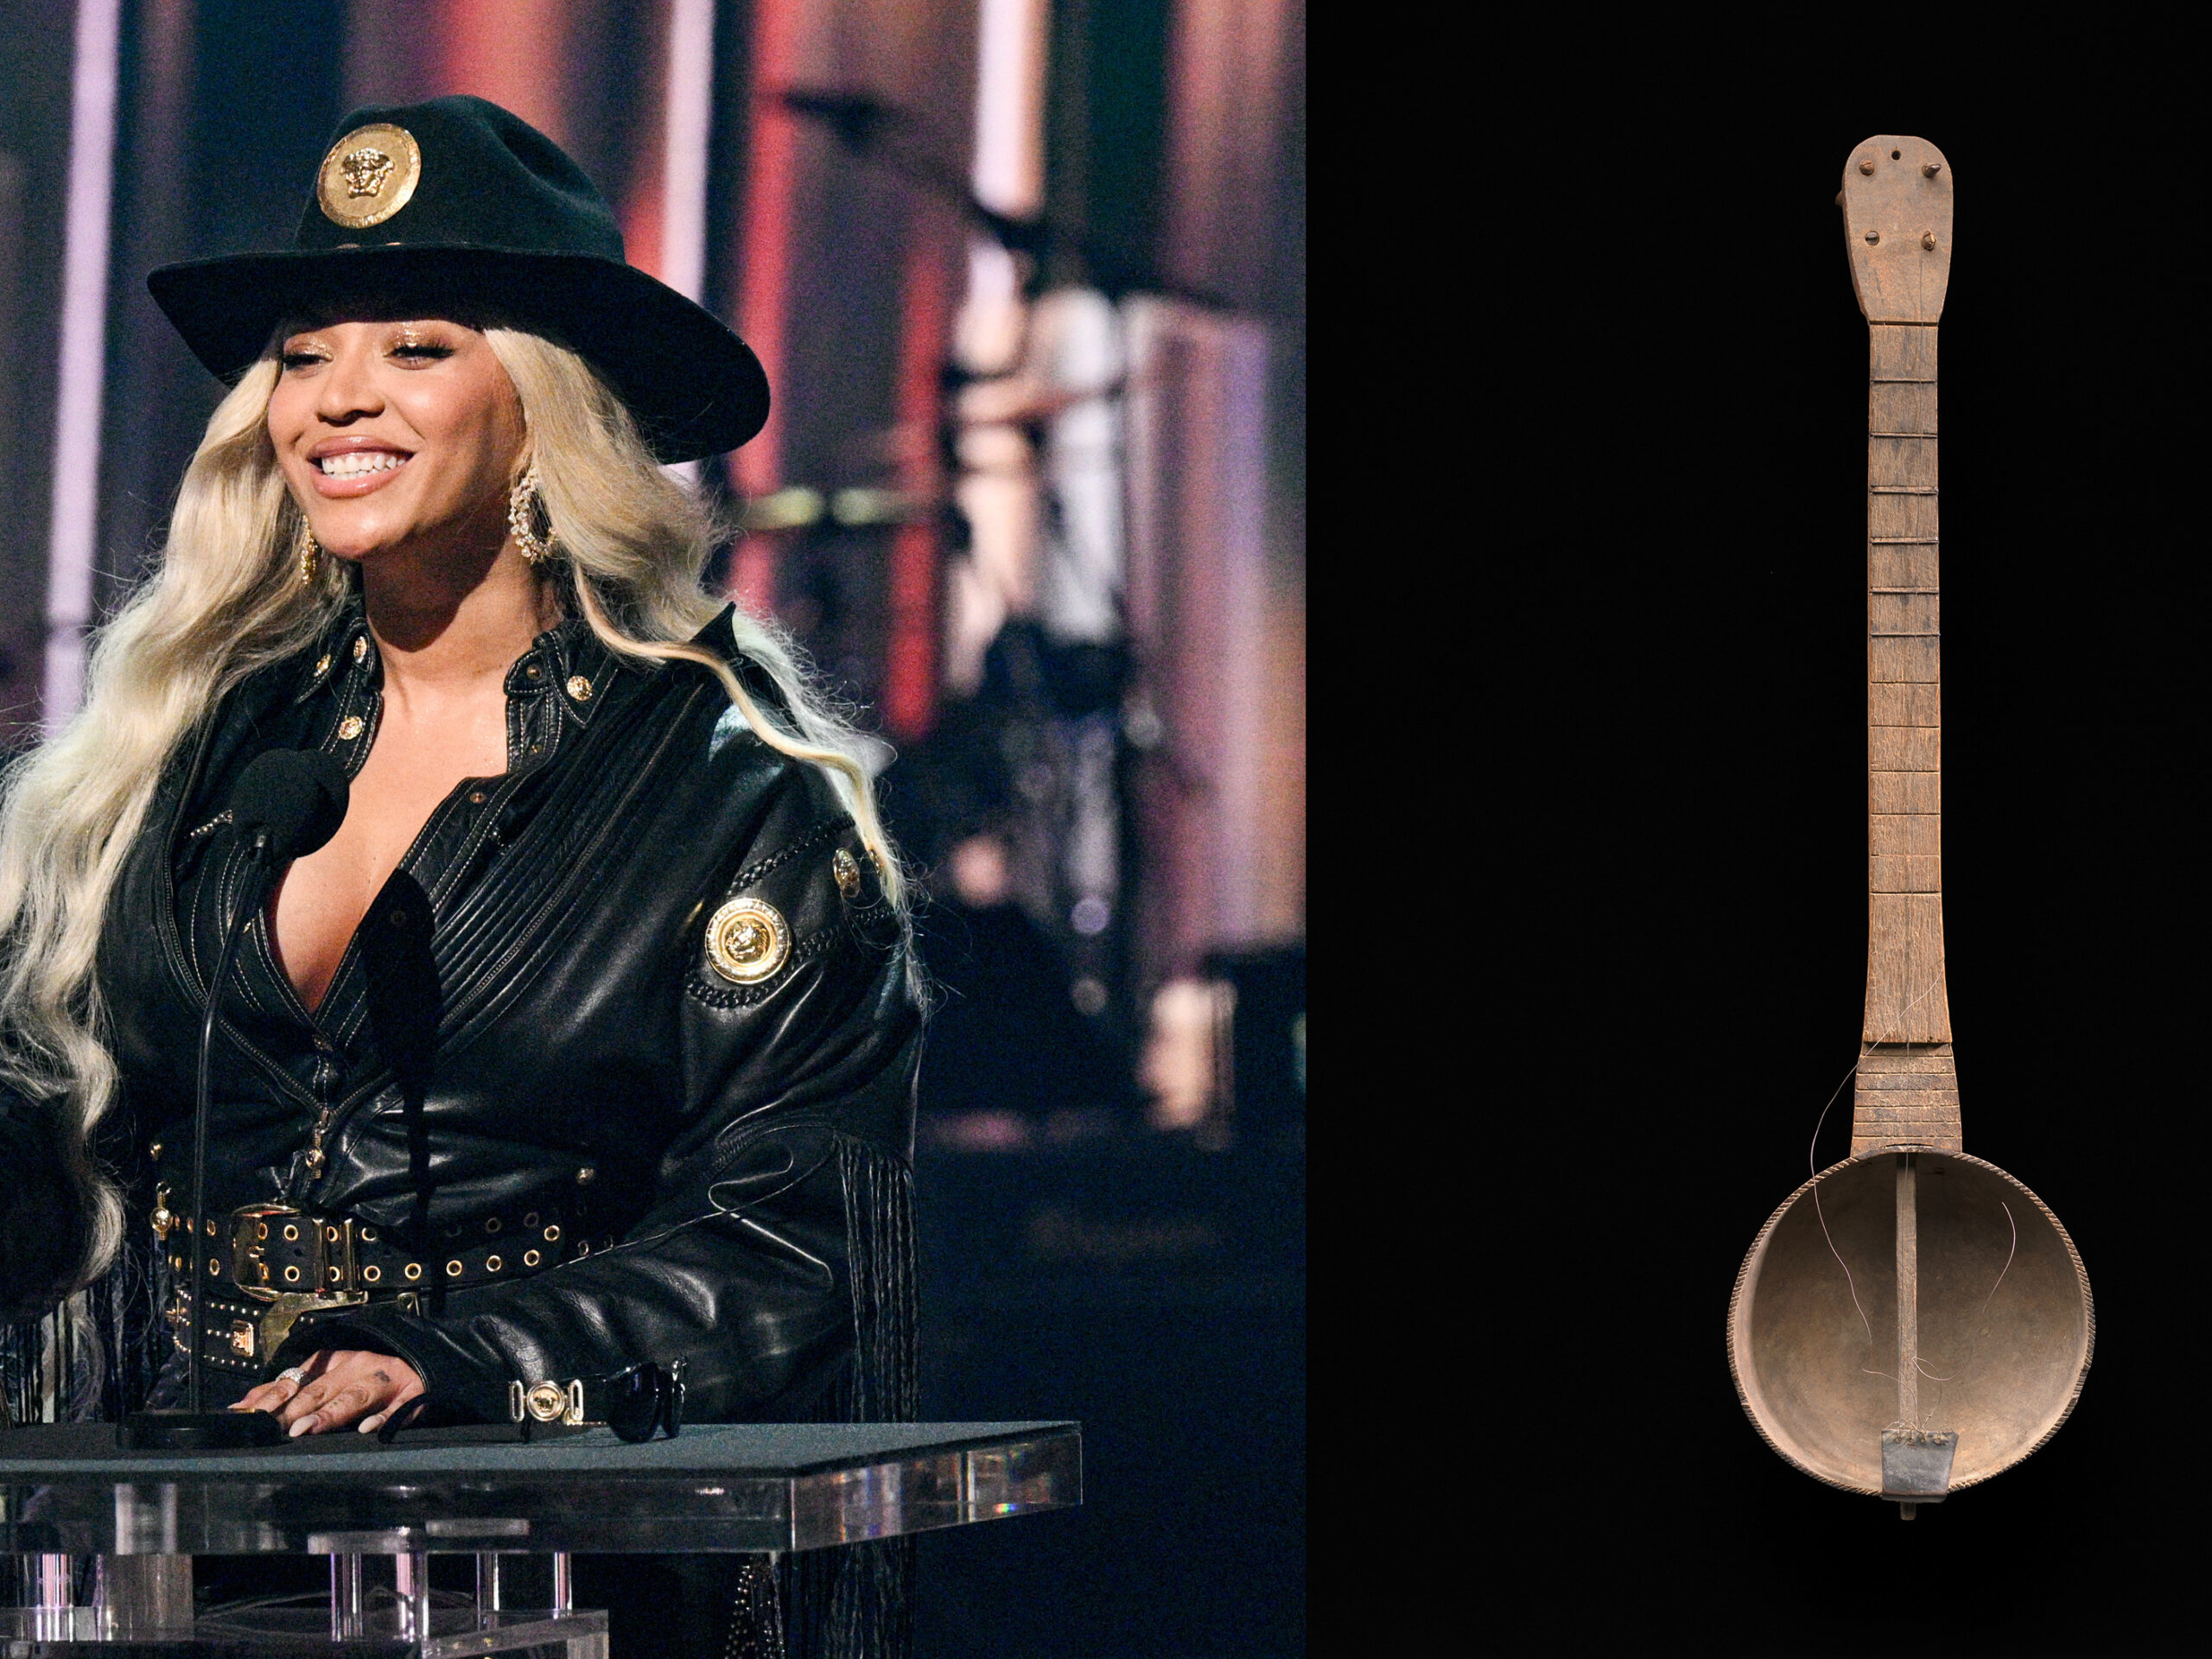 The banjo is a star of Beyoncé’s new album. Turns out it has African roots